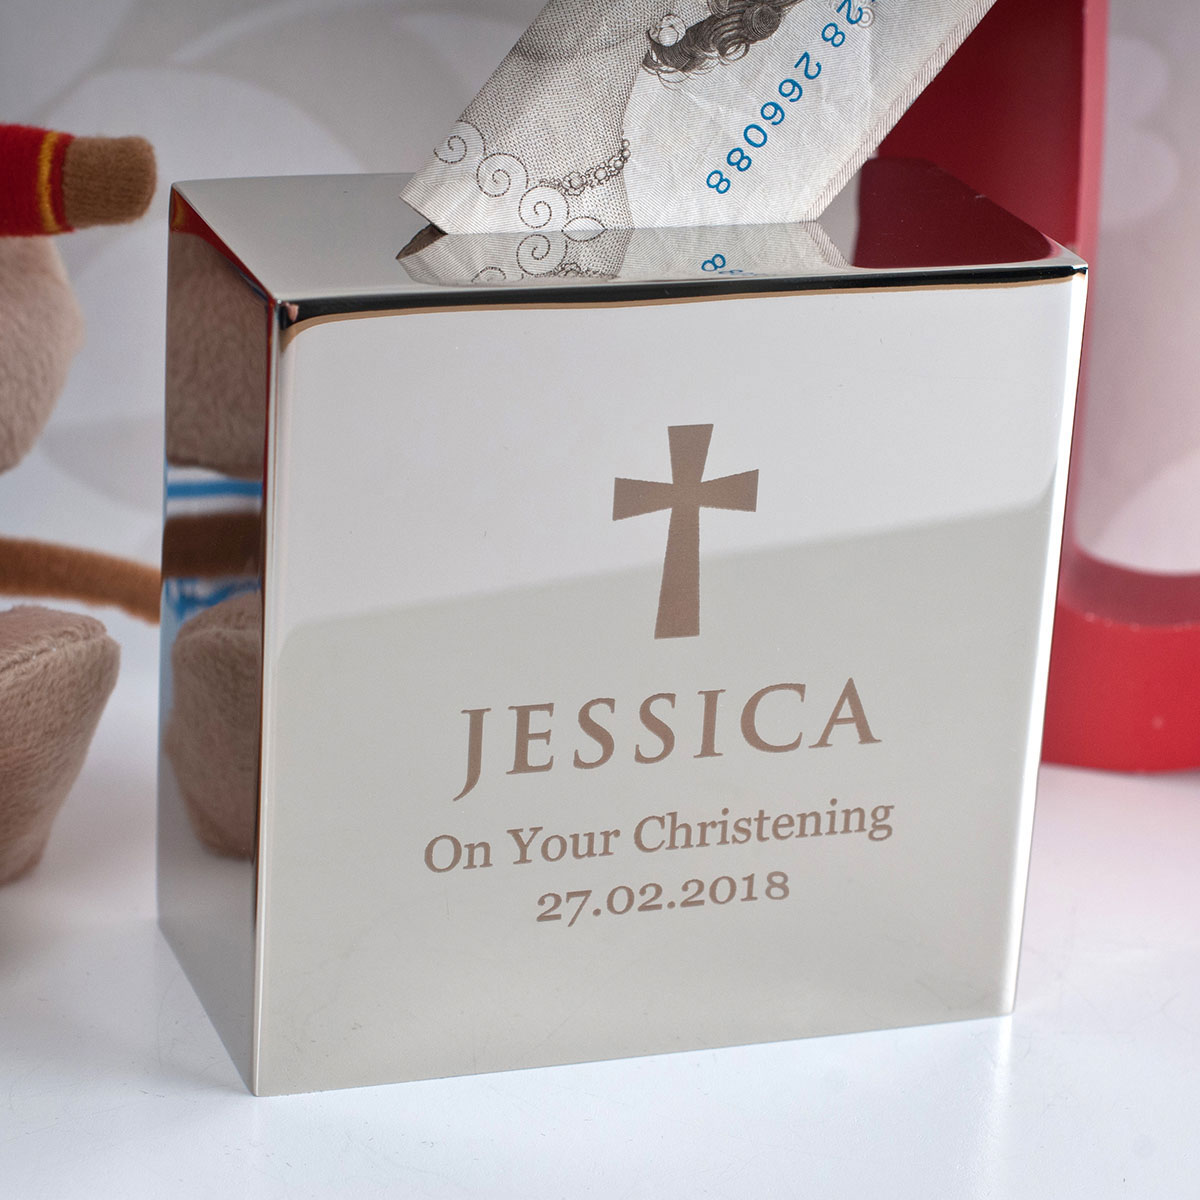 Personalised Engraved Silver Plated Money Box - Christening